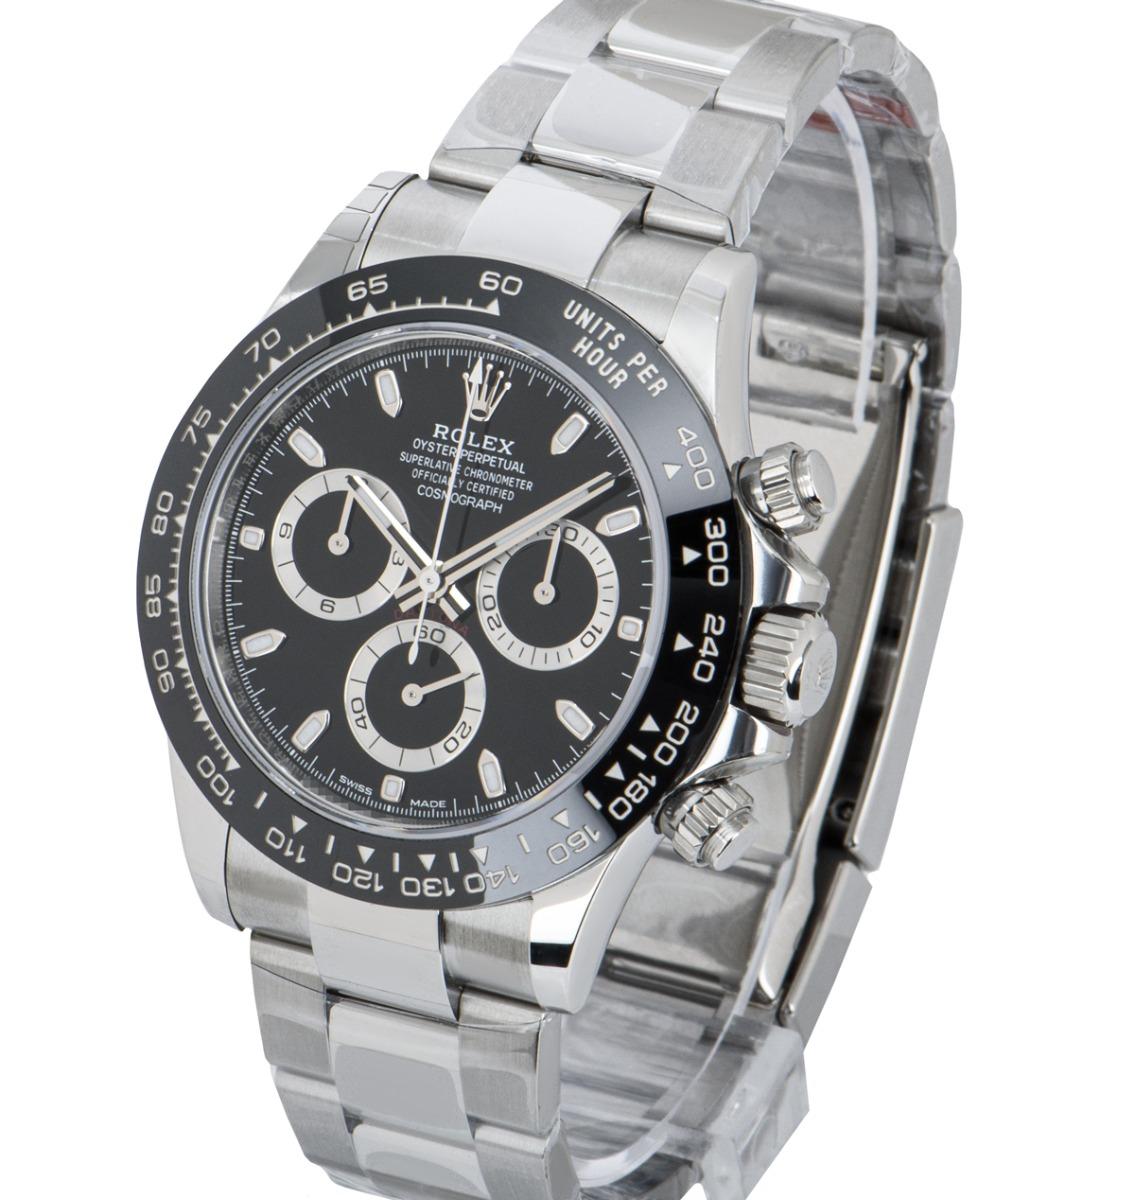 Rolex Daytona Black Dial 116500LN In New Condition For Sale In London, GB